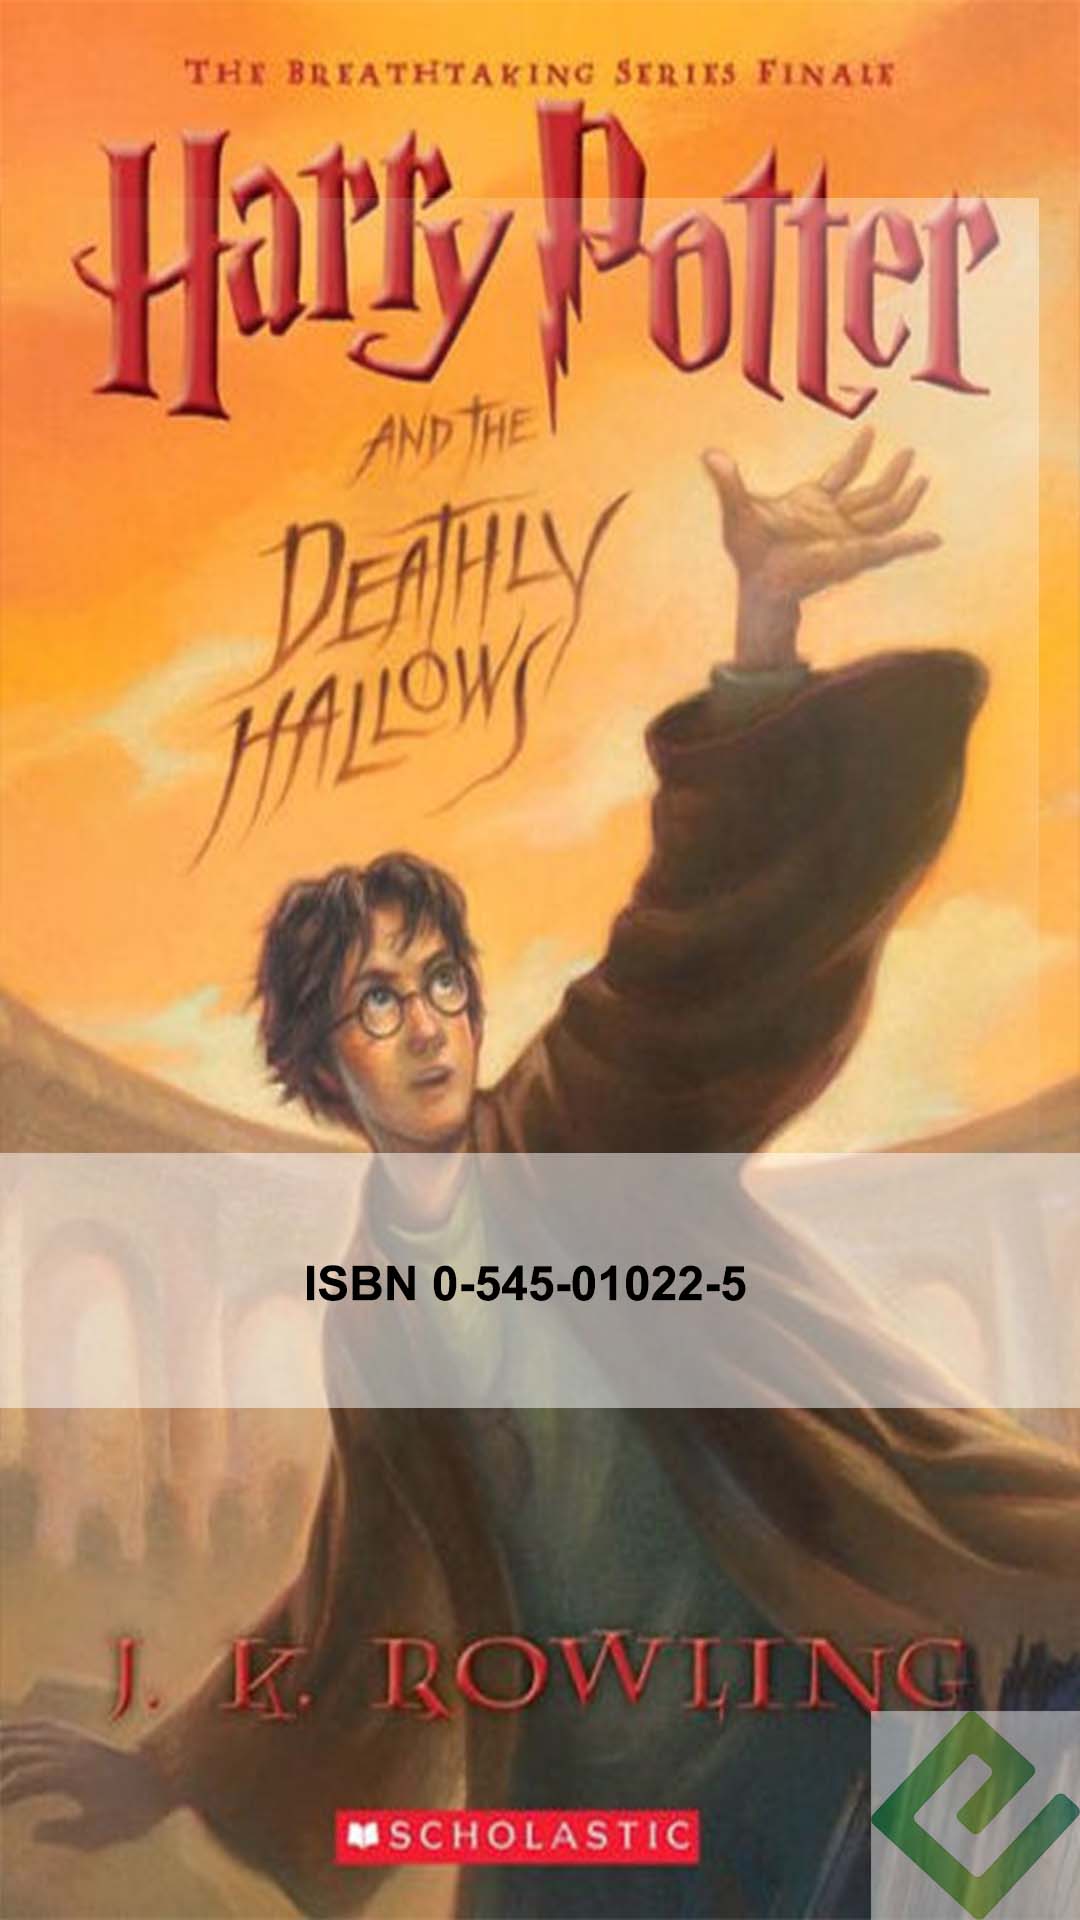 harry potter and the deathly hallows audiobook 120 bitrate download